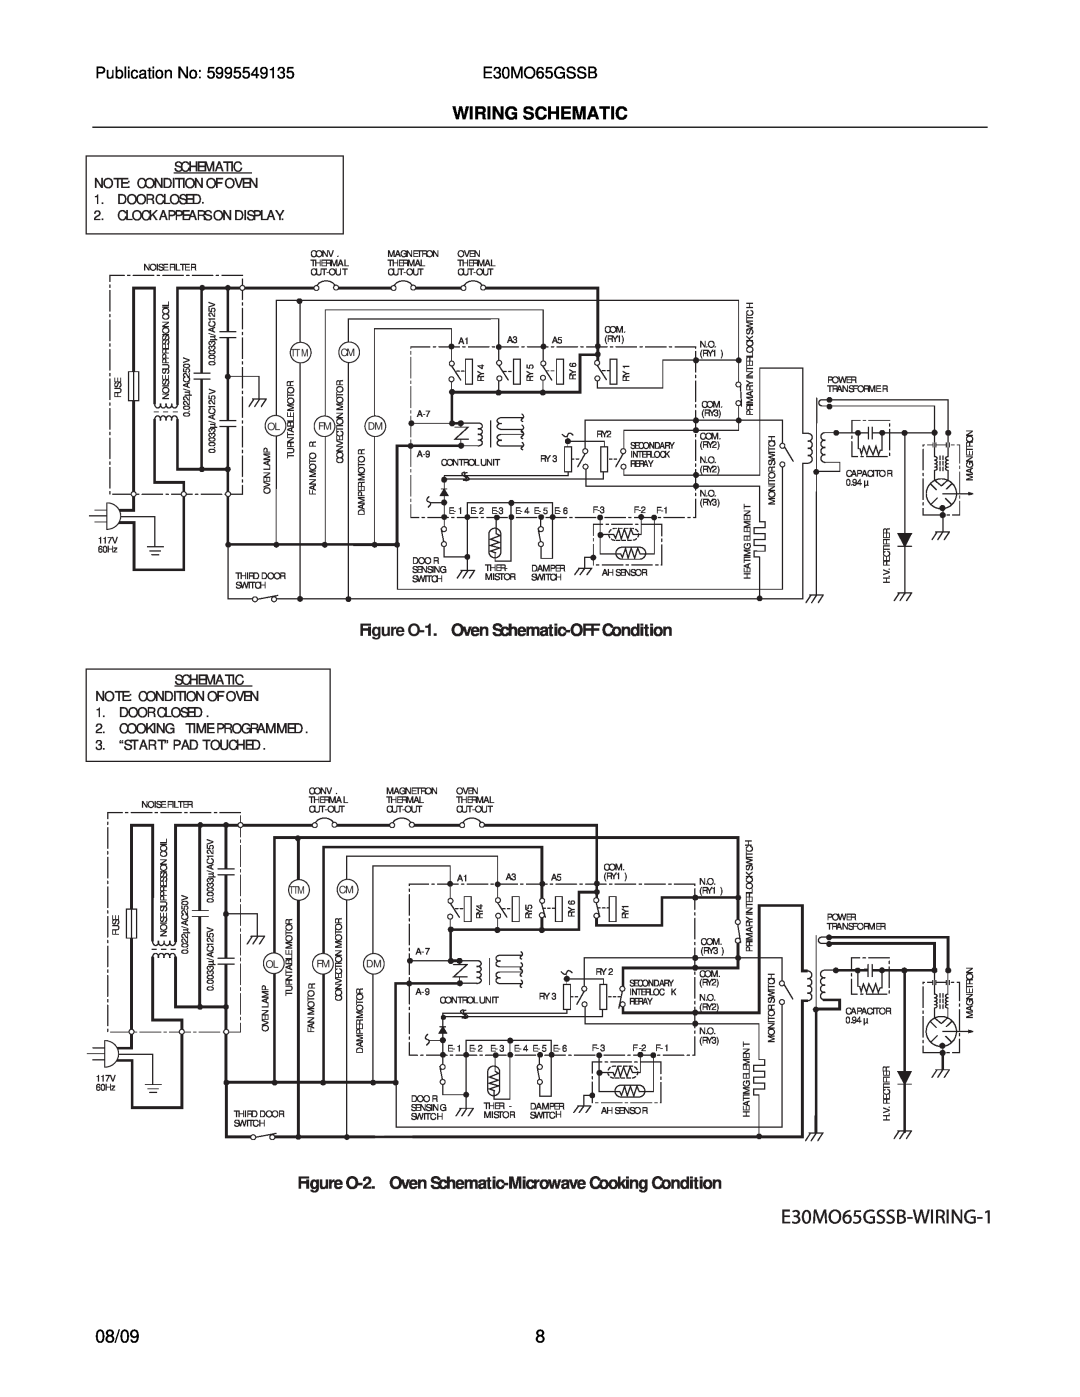 Electrolux E30MO65GSSB Wiring Schematic, Figure O-2. Oven Schematic-Microwave Cooking Condition, 08/09 